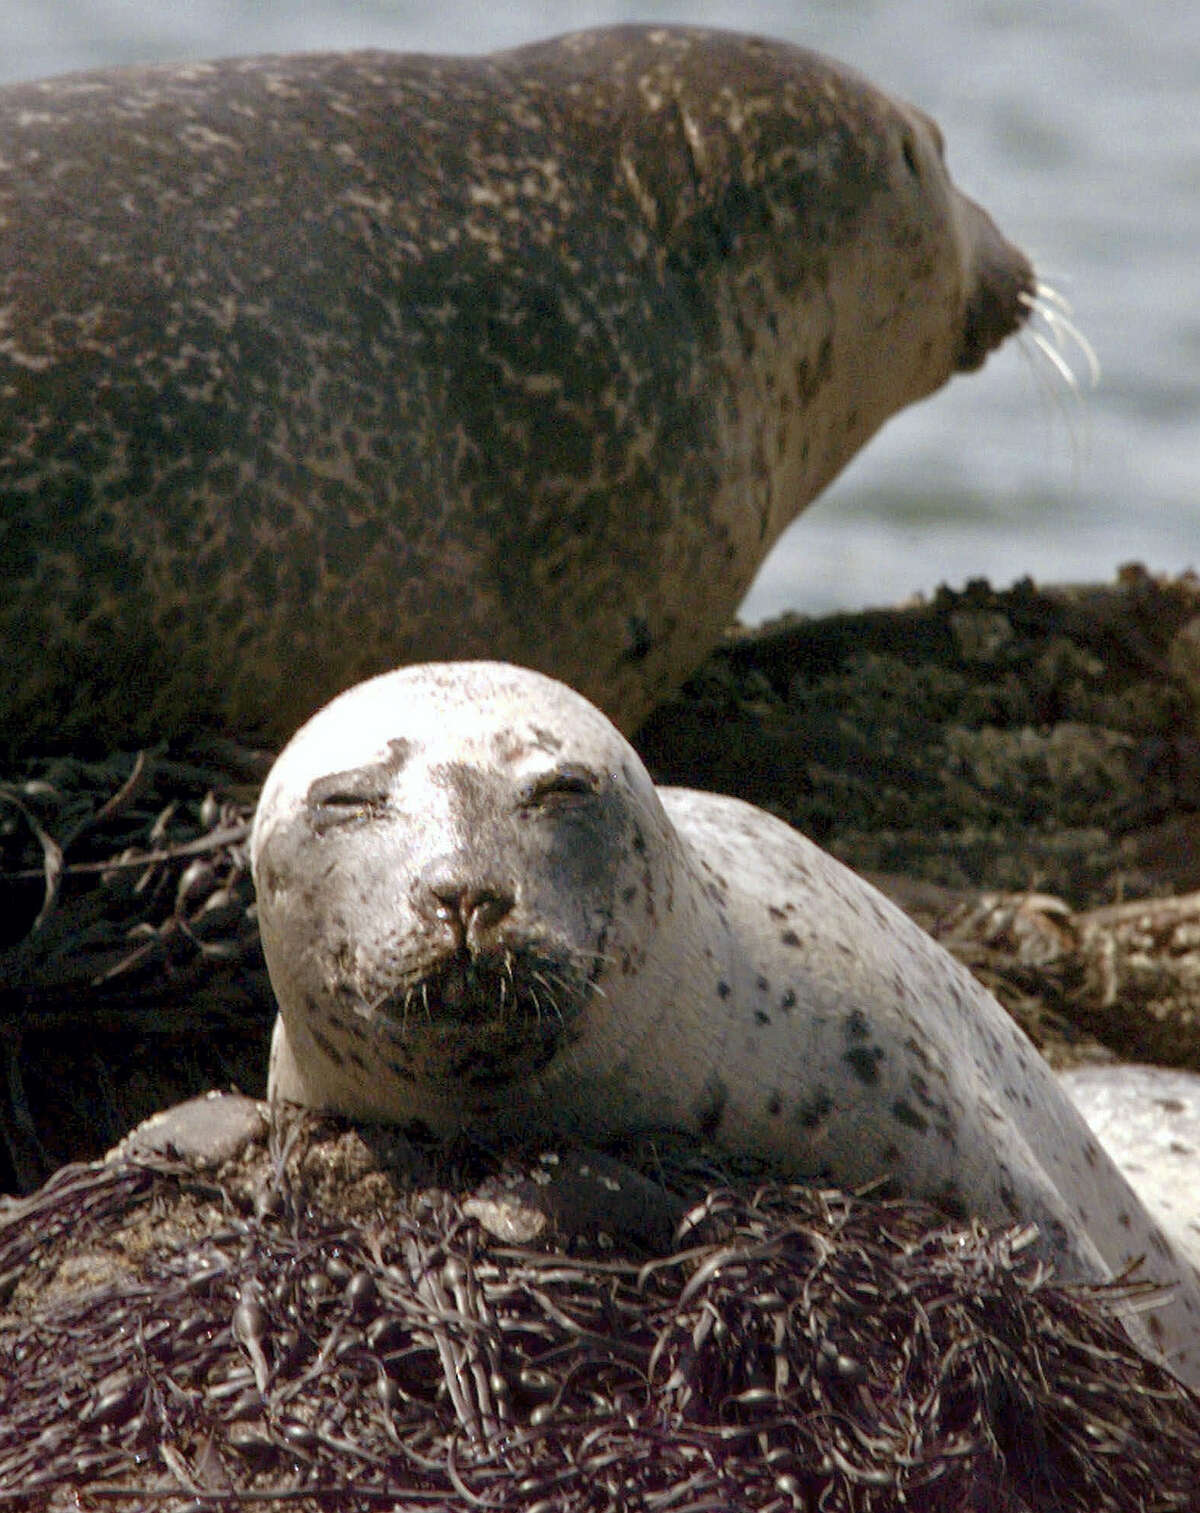 In this file photo, a young harbor seal lounges on top of seaweed that covers partially submerged Cedar Ledge near Cundy’s Harbor, Maine. In a statement released Thursday the Greater Atlantic Region of the National Oceanic and Atmospheric Administration Fisheries reminded New England beach-goers to resist any temptation to take a selfie with a cute little seal pup because it can put both people and the animals at risk.